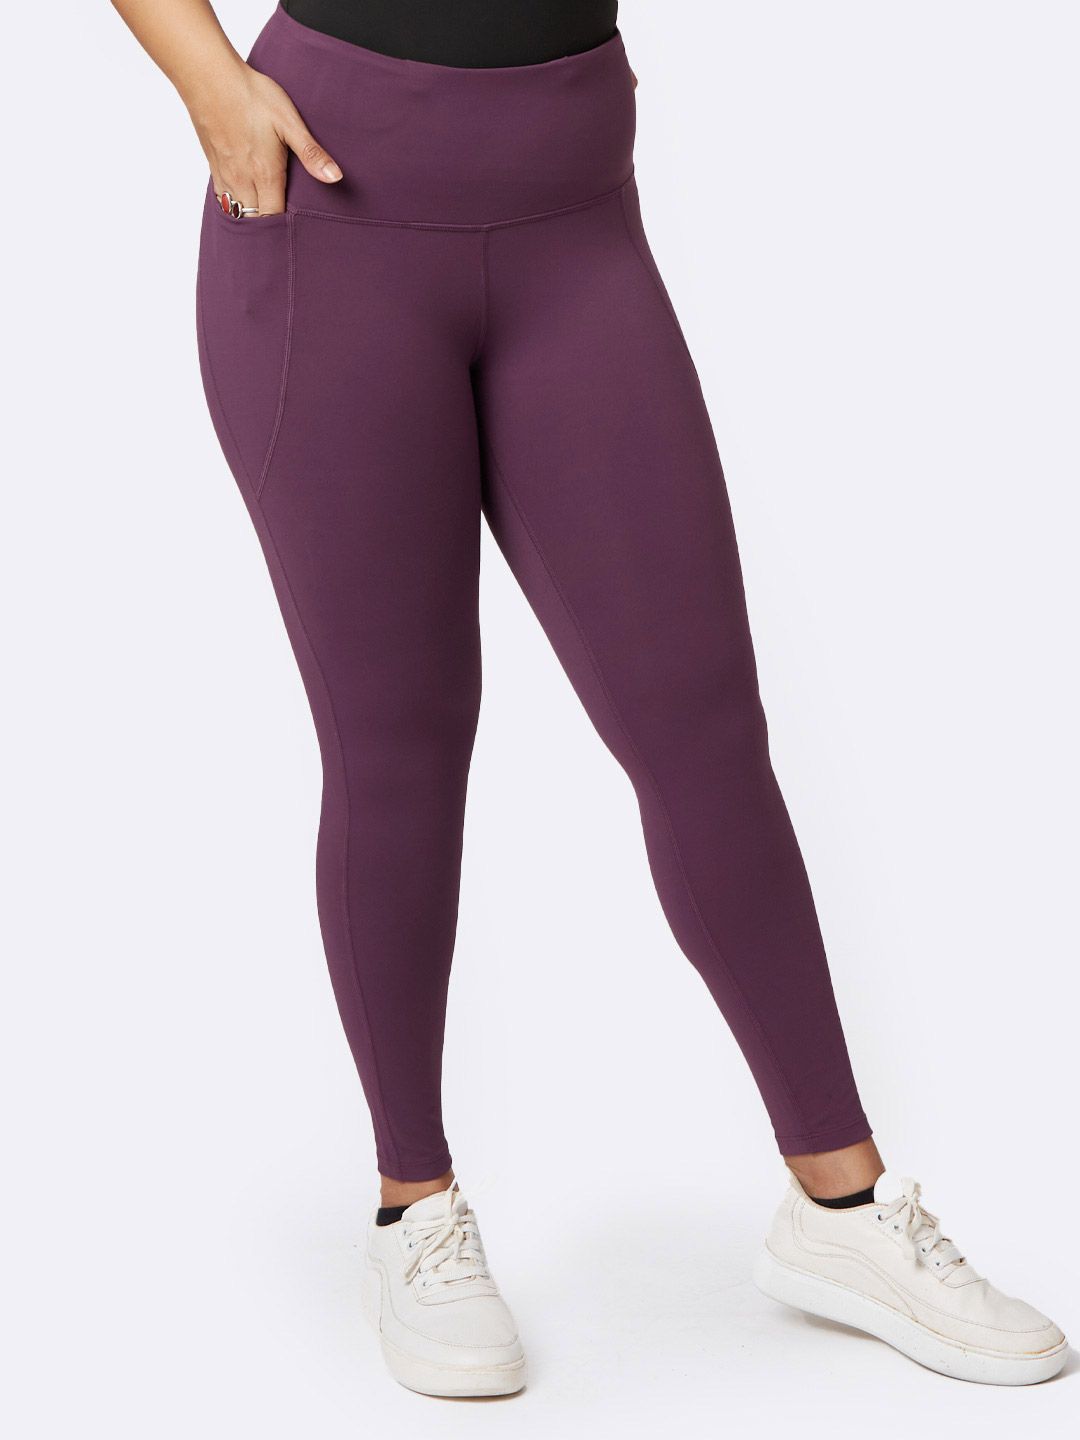 BlissClub Women Grape Super Stretchy and High Waisted The Ultimate Leggings Price in India